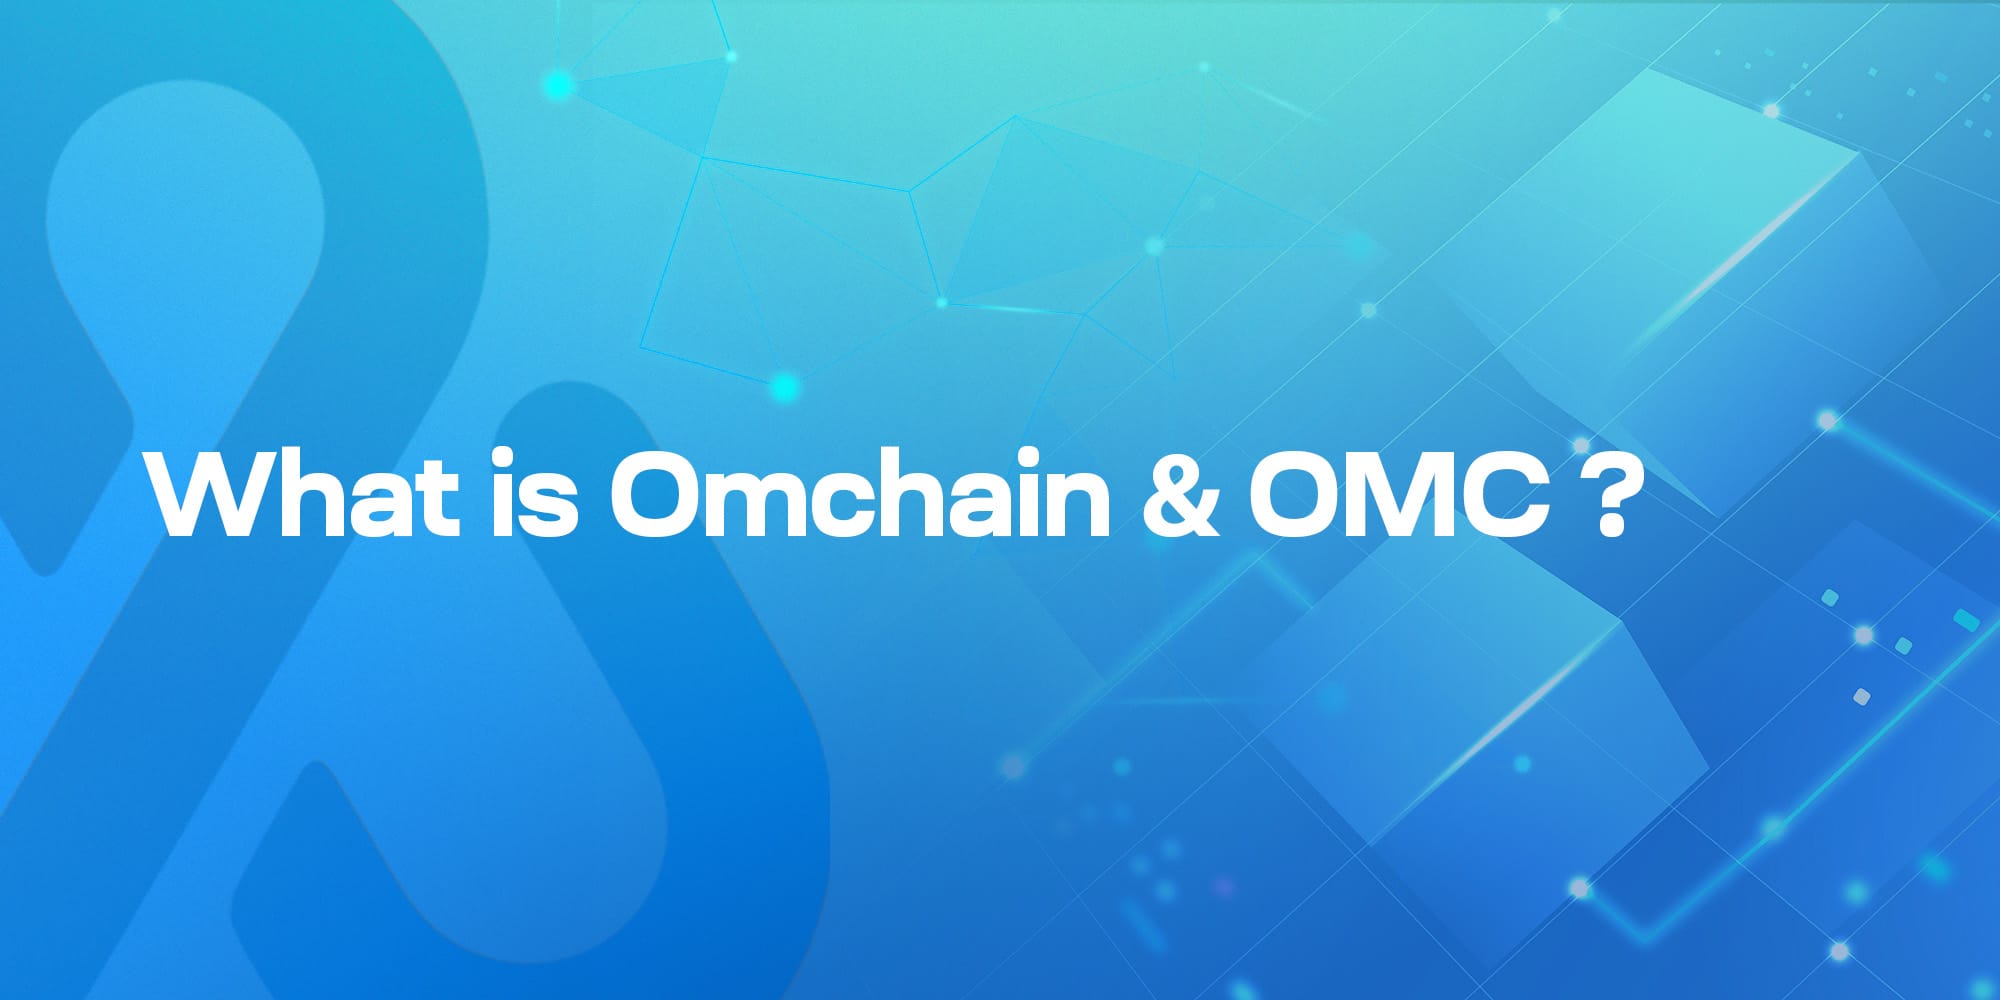 What is Omchain & OMC ?